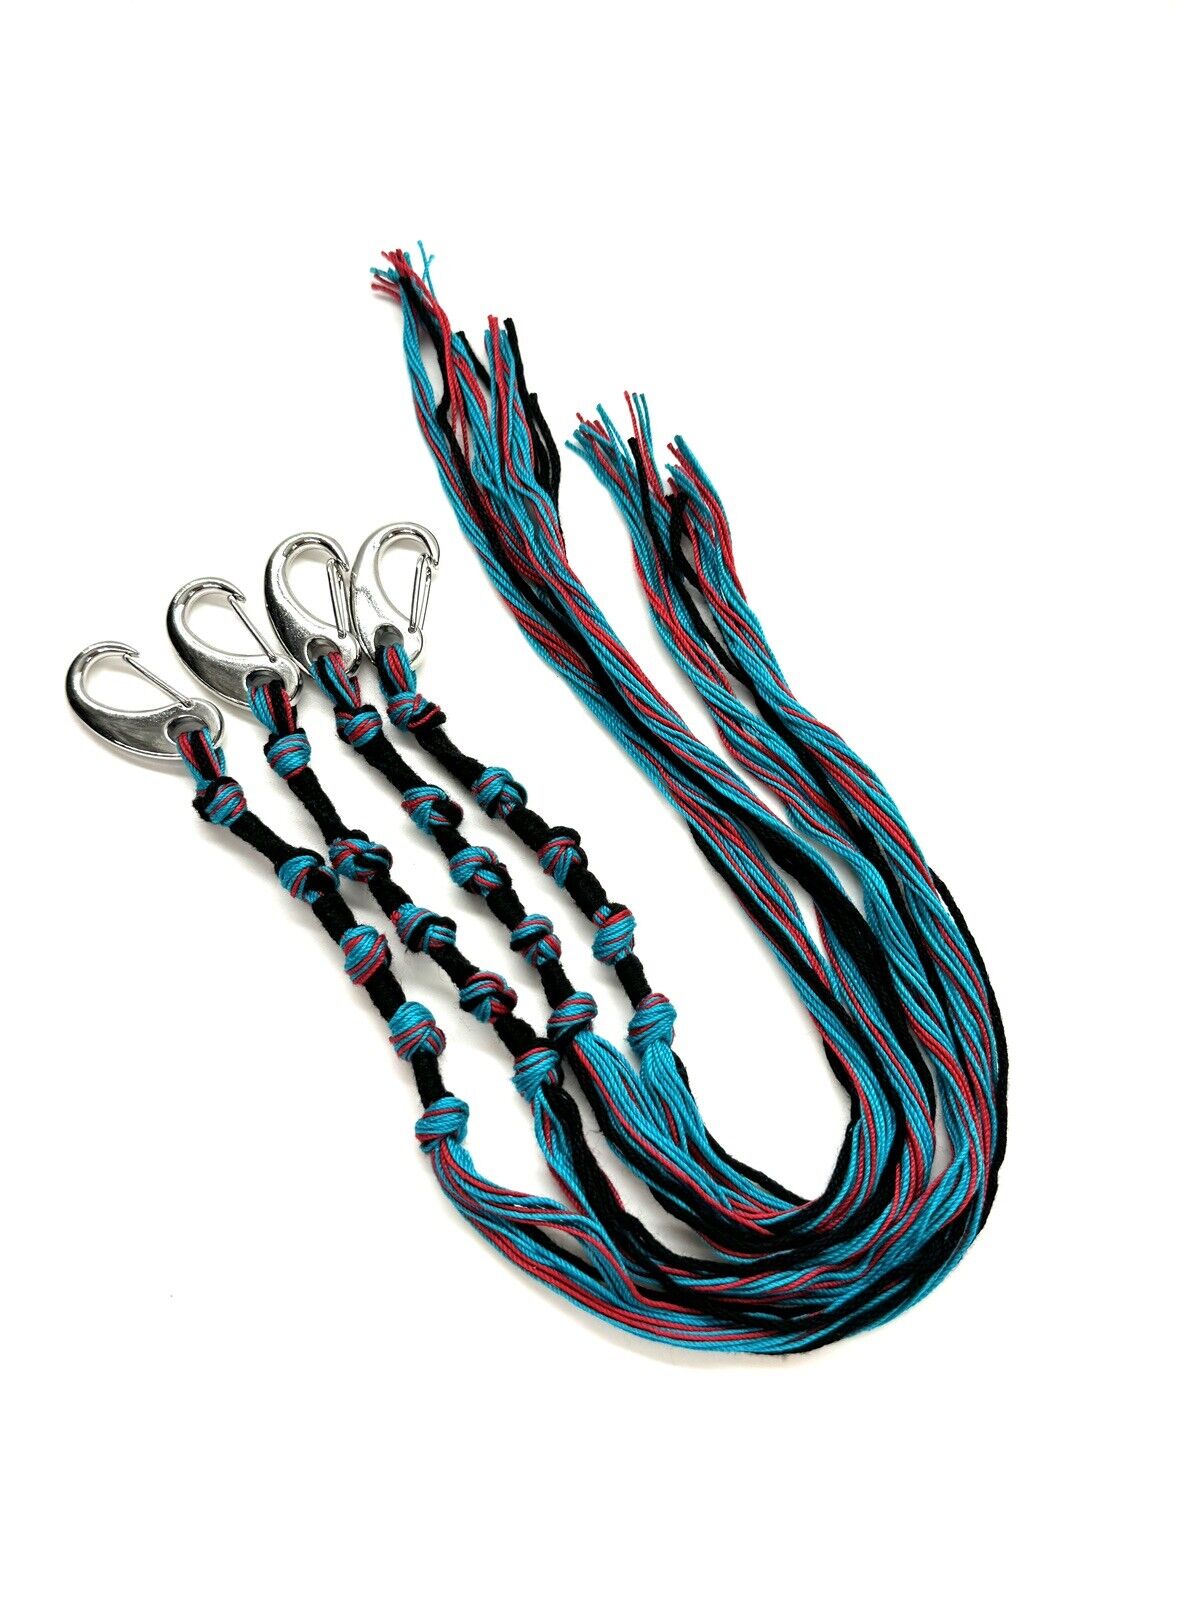 TZITZIT W/Clips, Colorful Red, Teal, Black